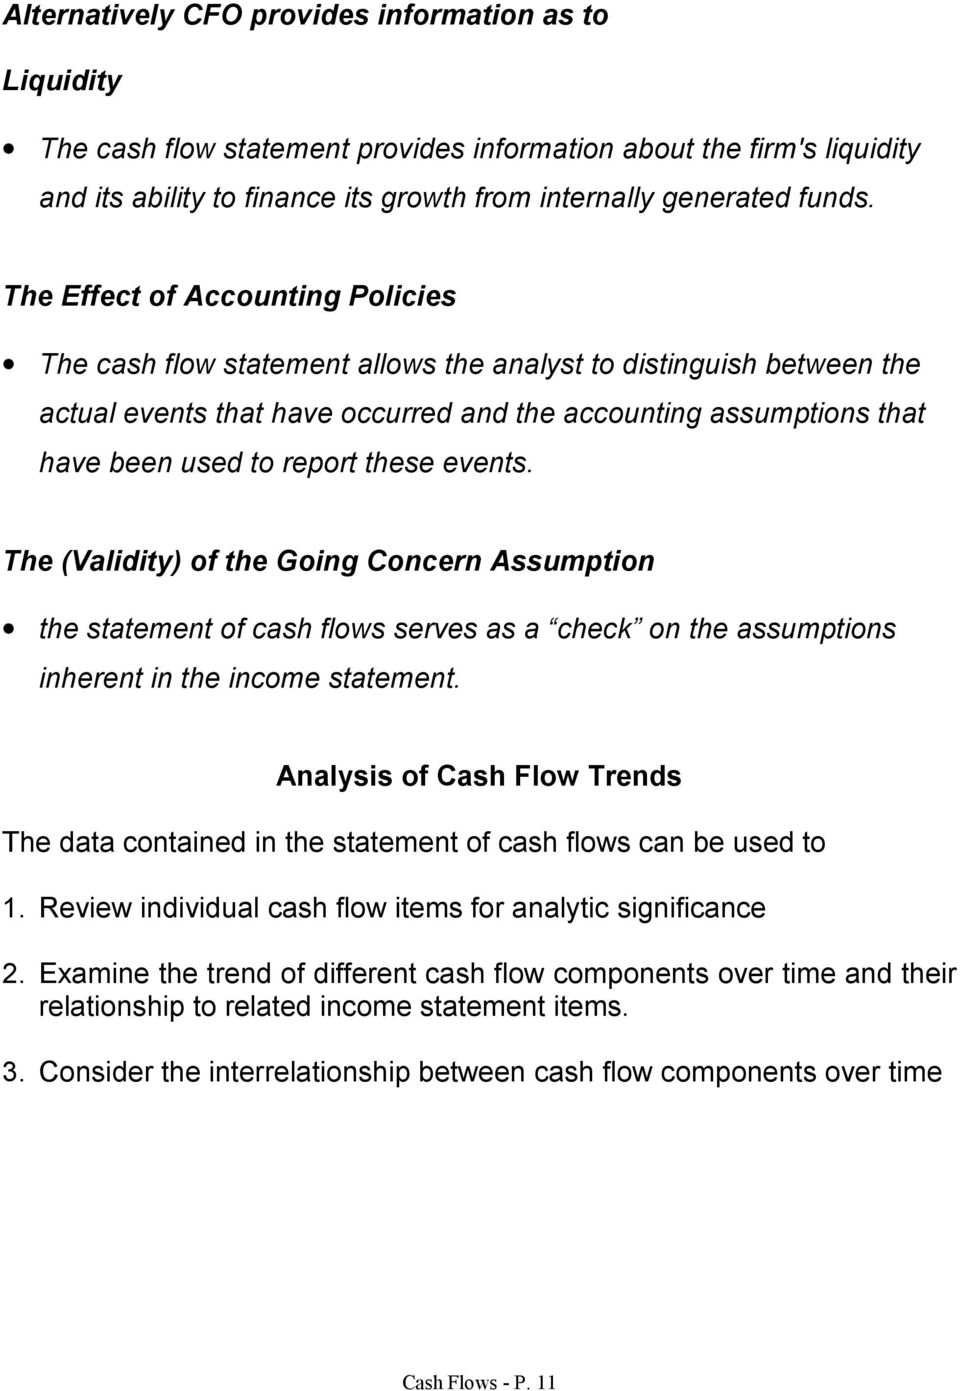 these events. The (Validity) of the Going Concern Assumption the statement of cash flows serves as a check on the assumptions inherent in the income statement.